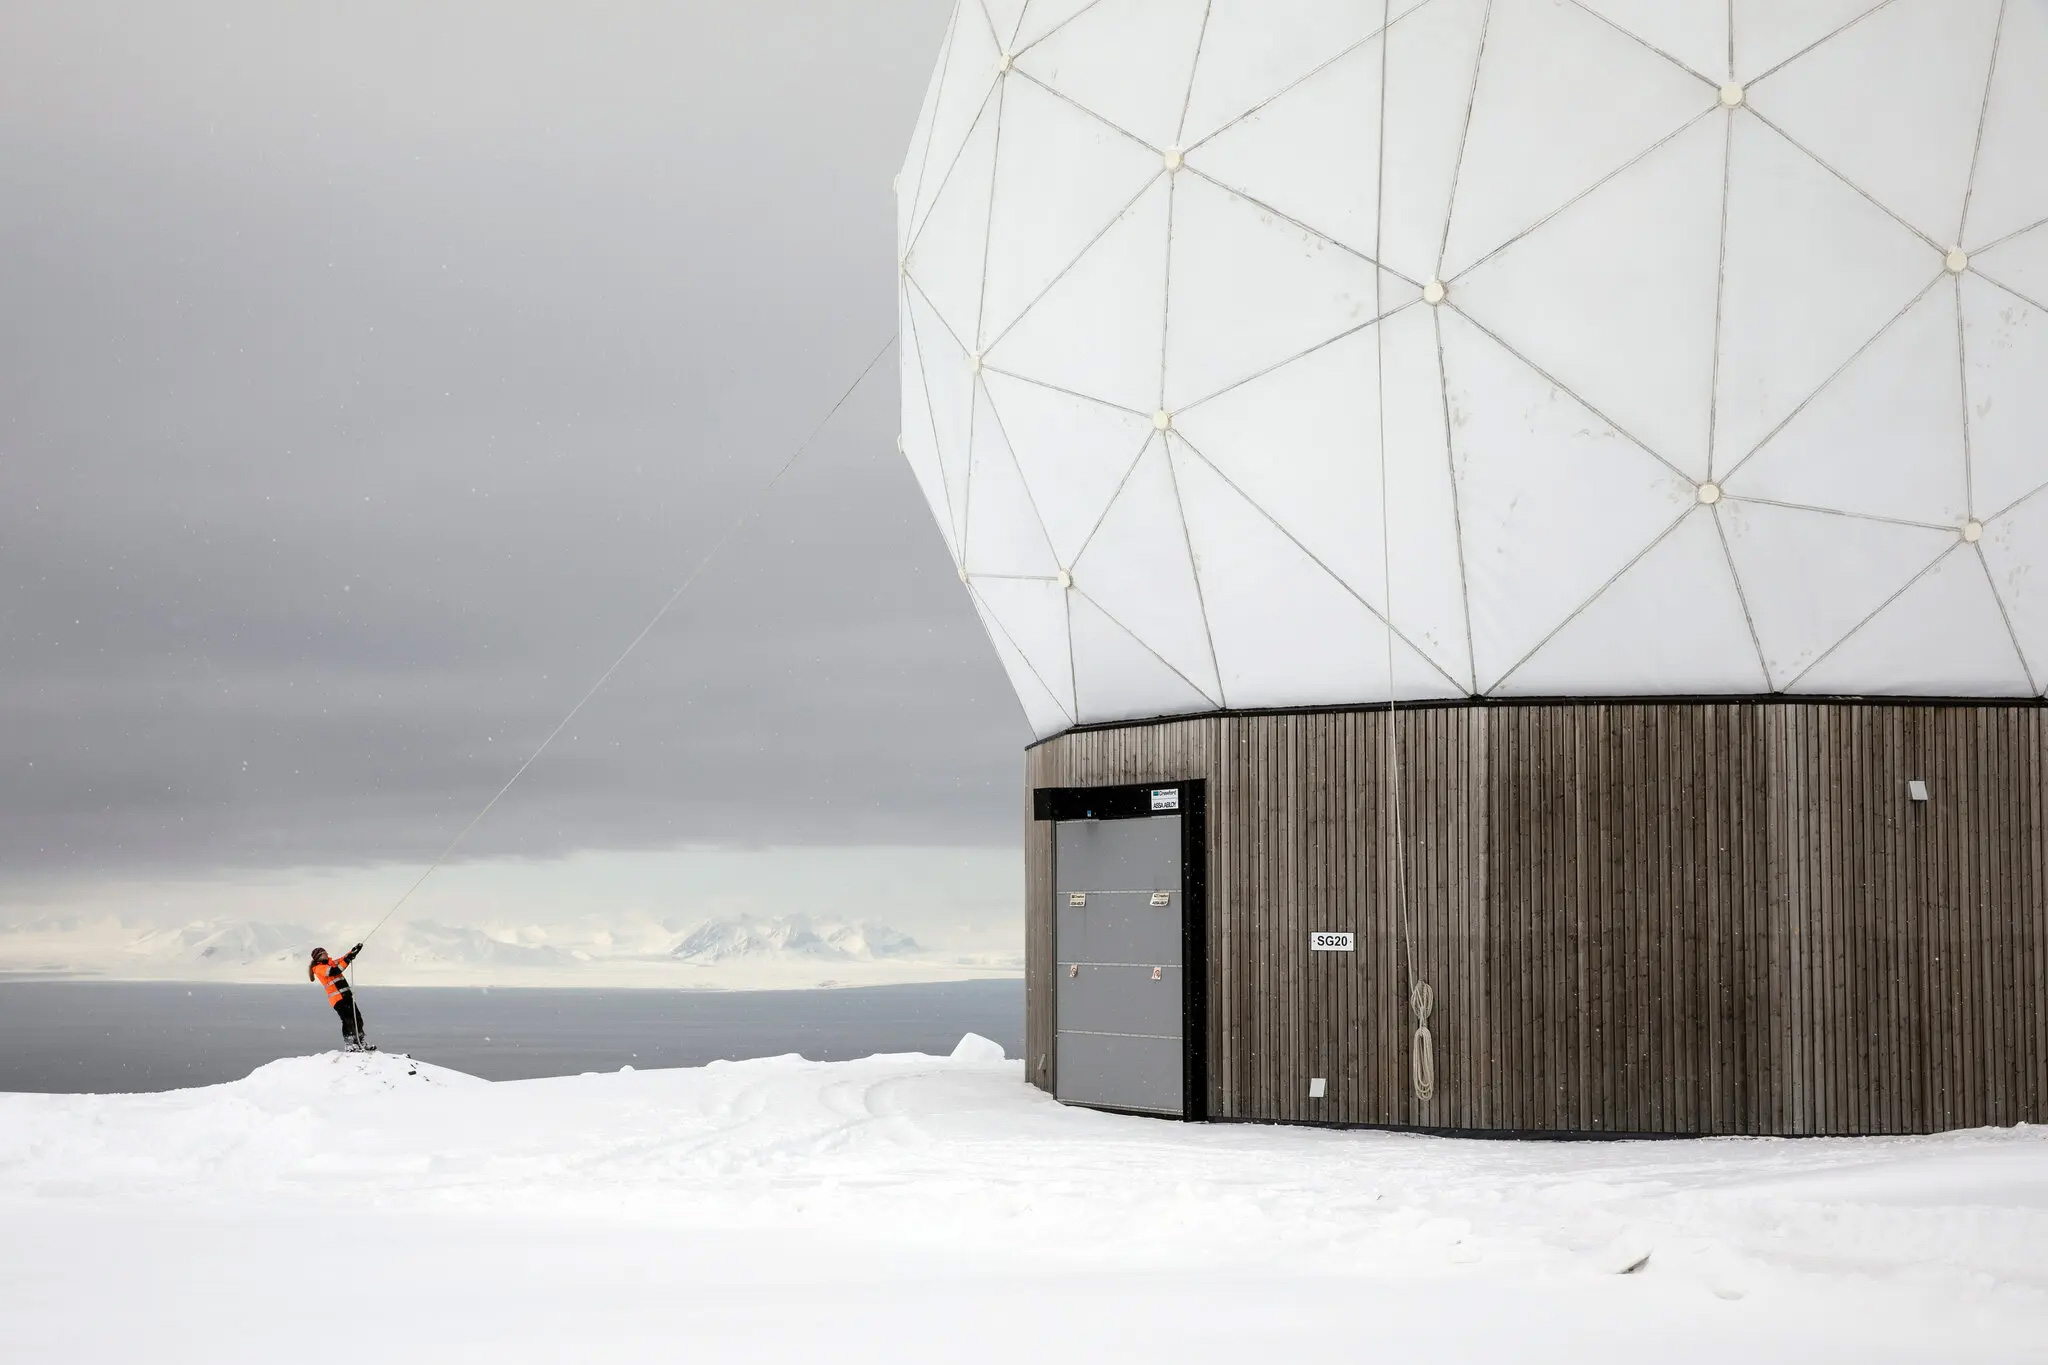 A member of the SvalSat team removed snow from an antenna dome.